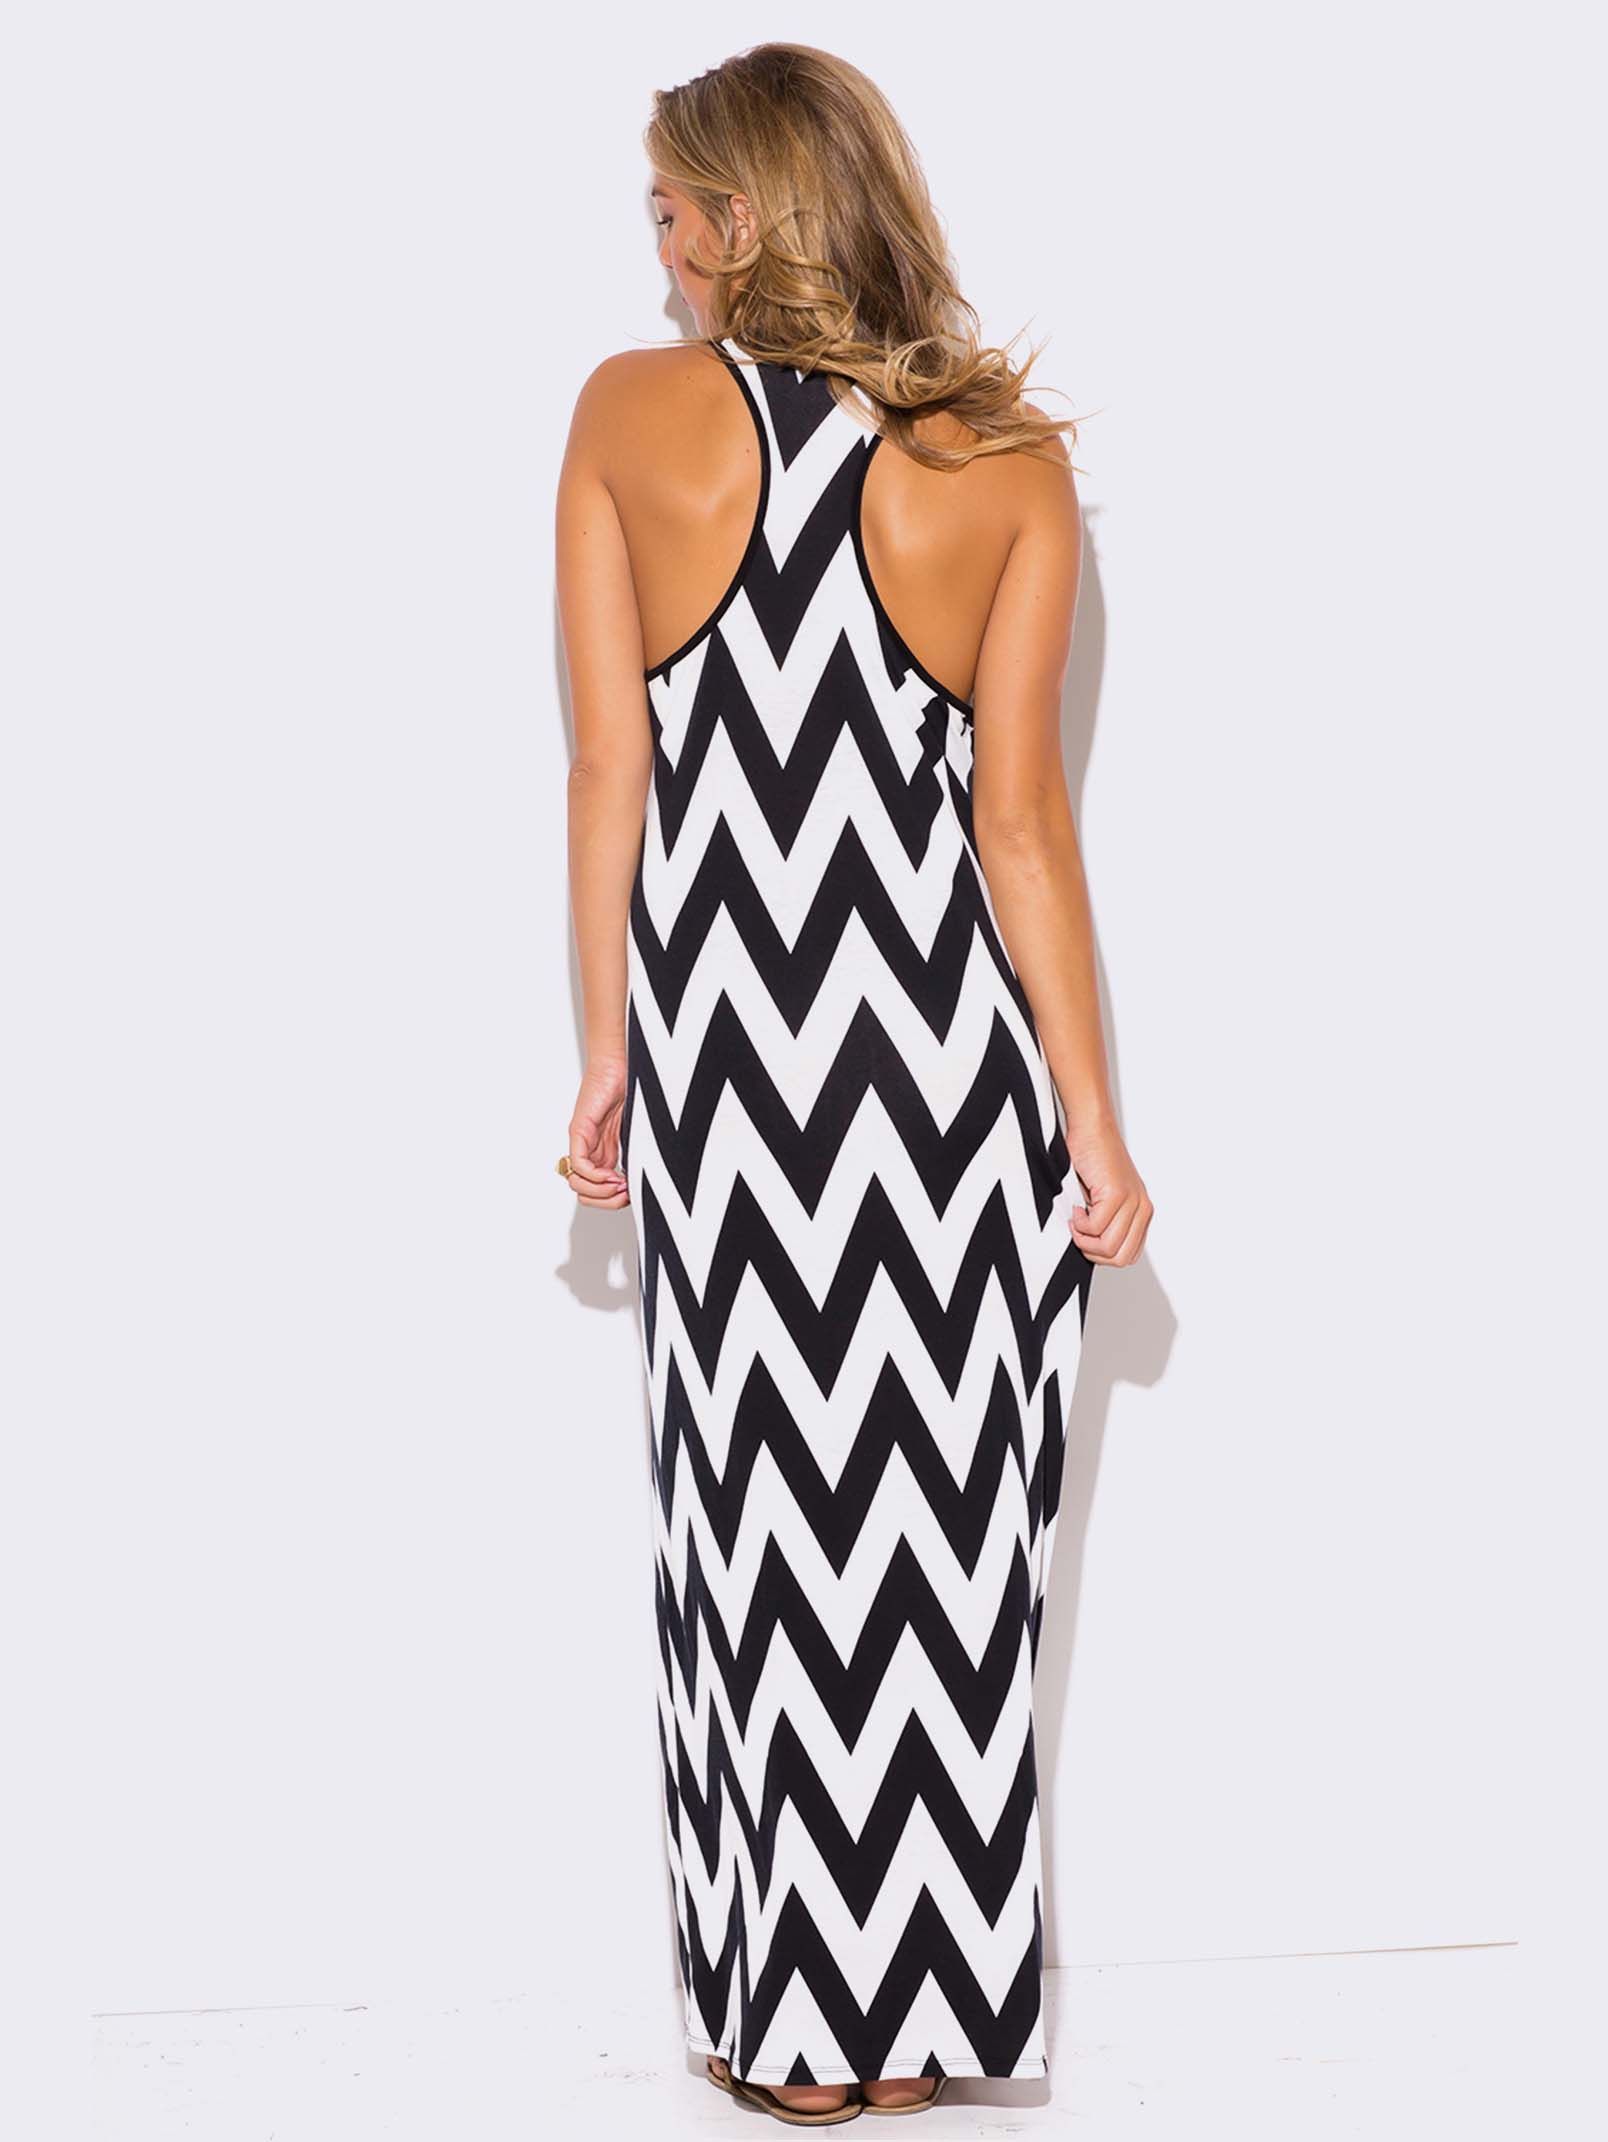 Chevron Plus Size Dress - Guide Of Selecting